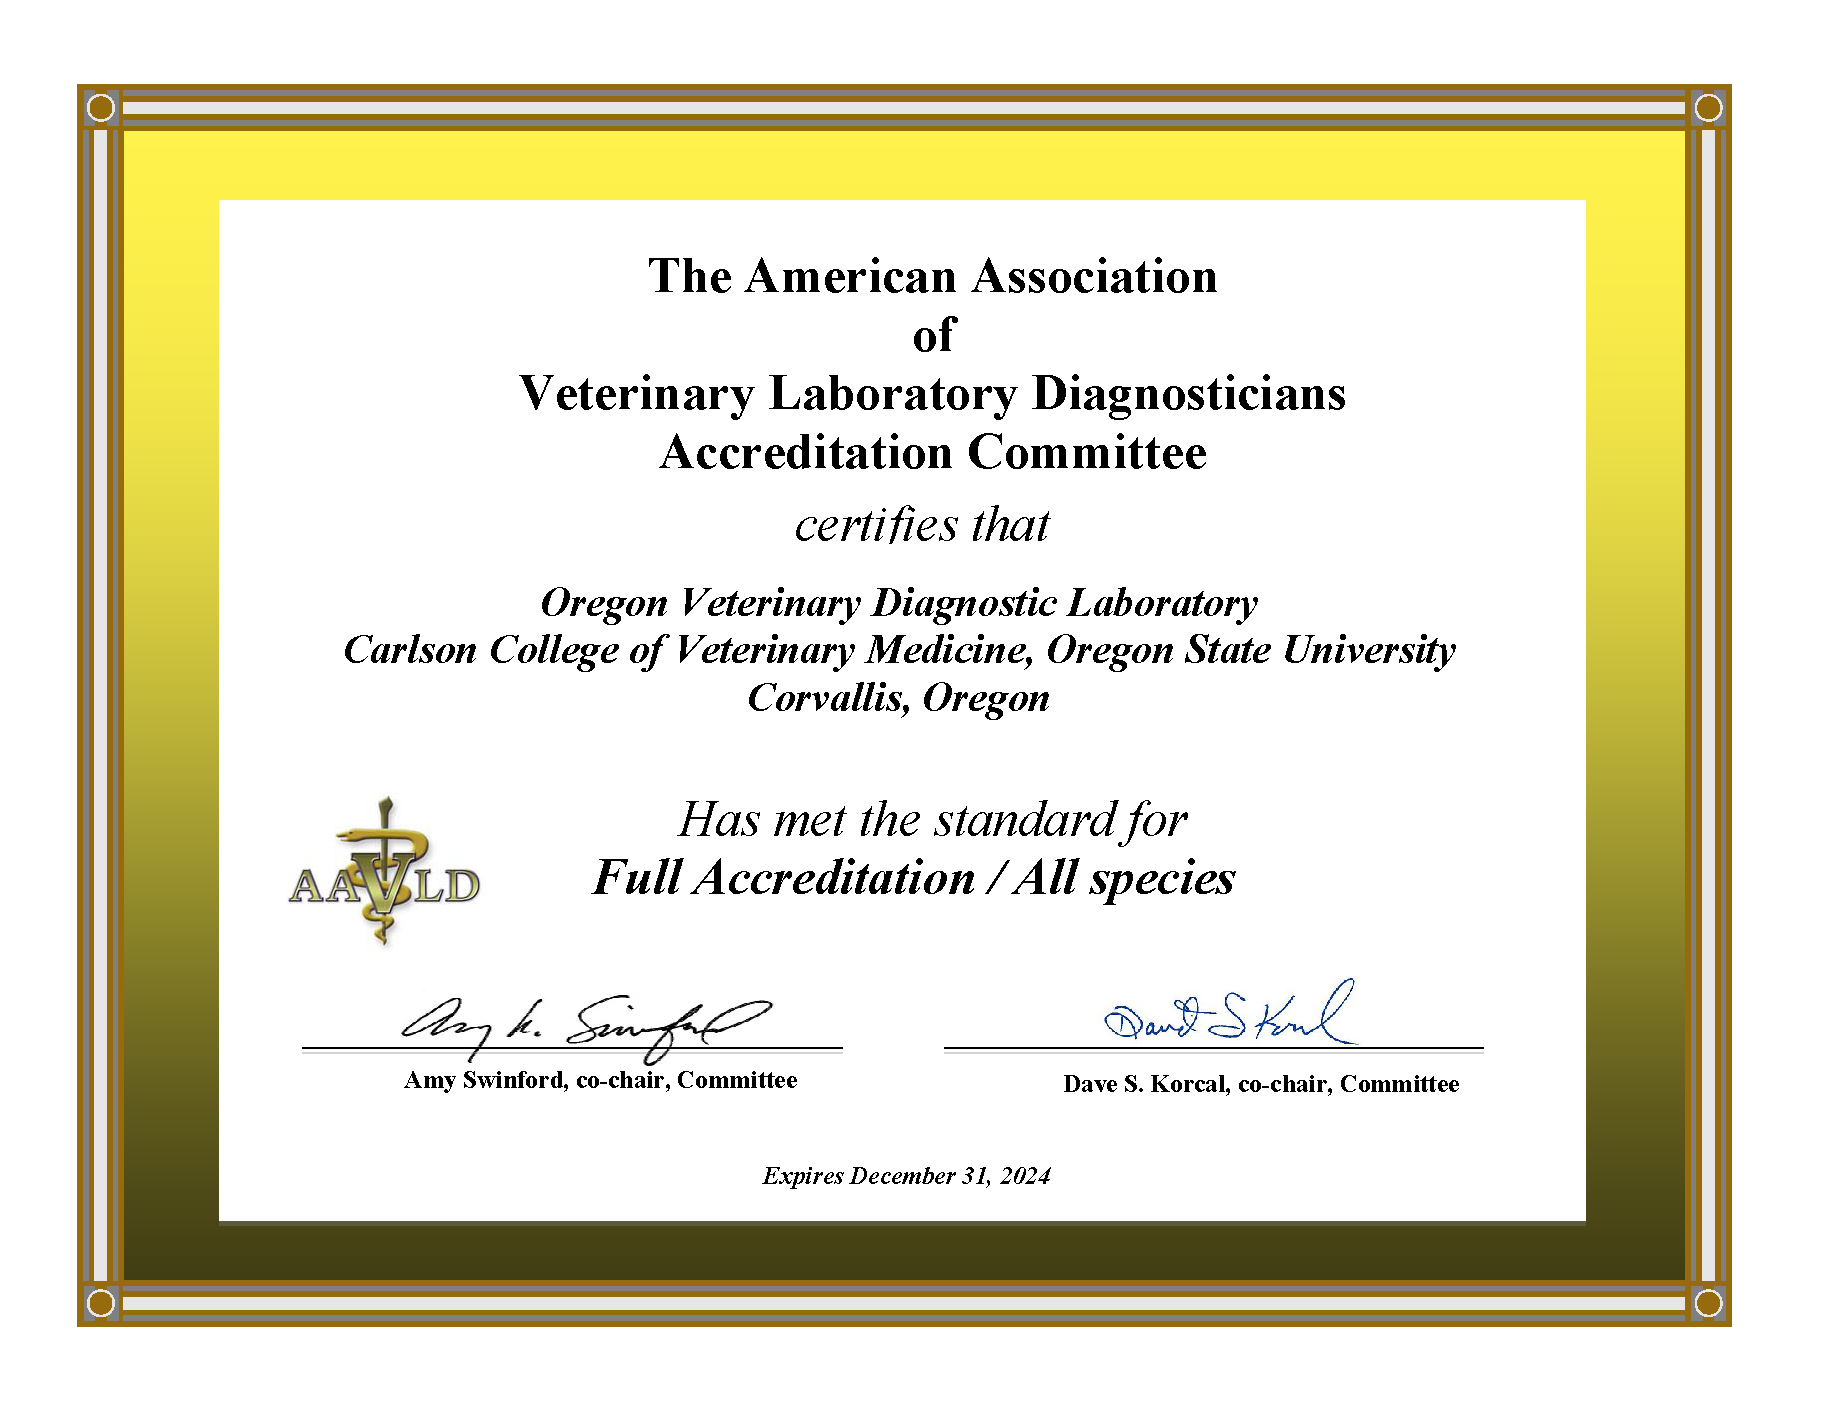 AAVLD Accreditation Certificate for OVDL